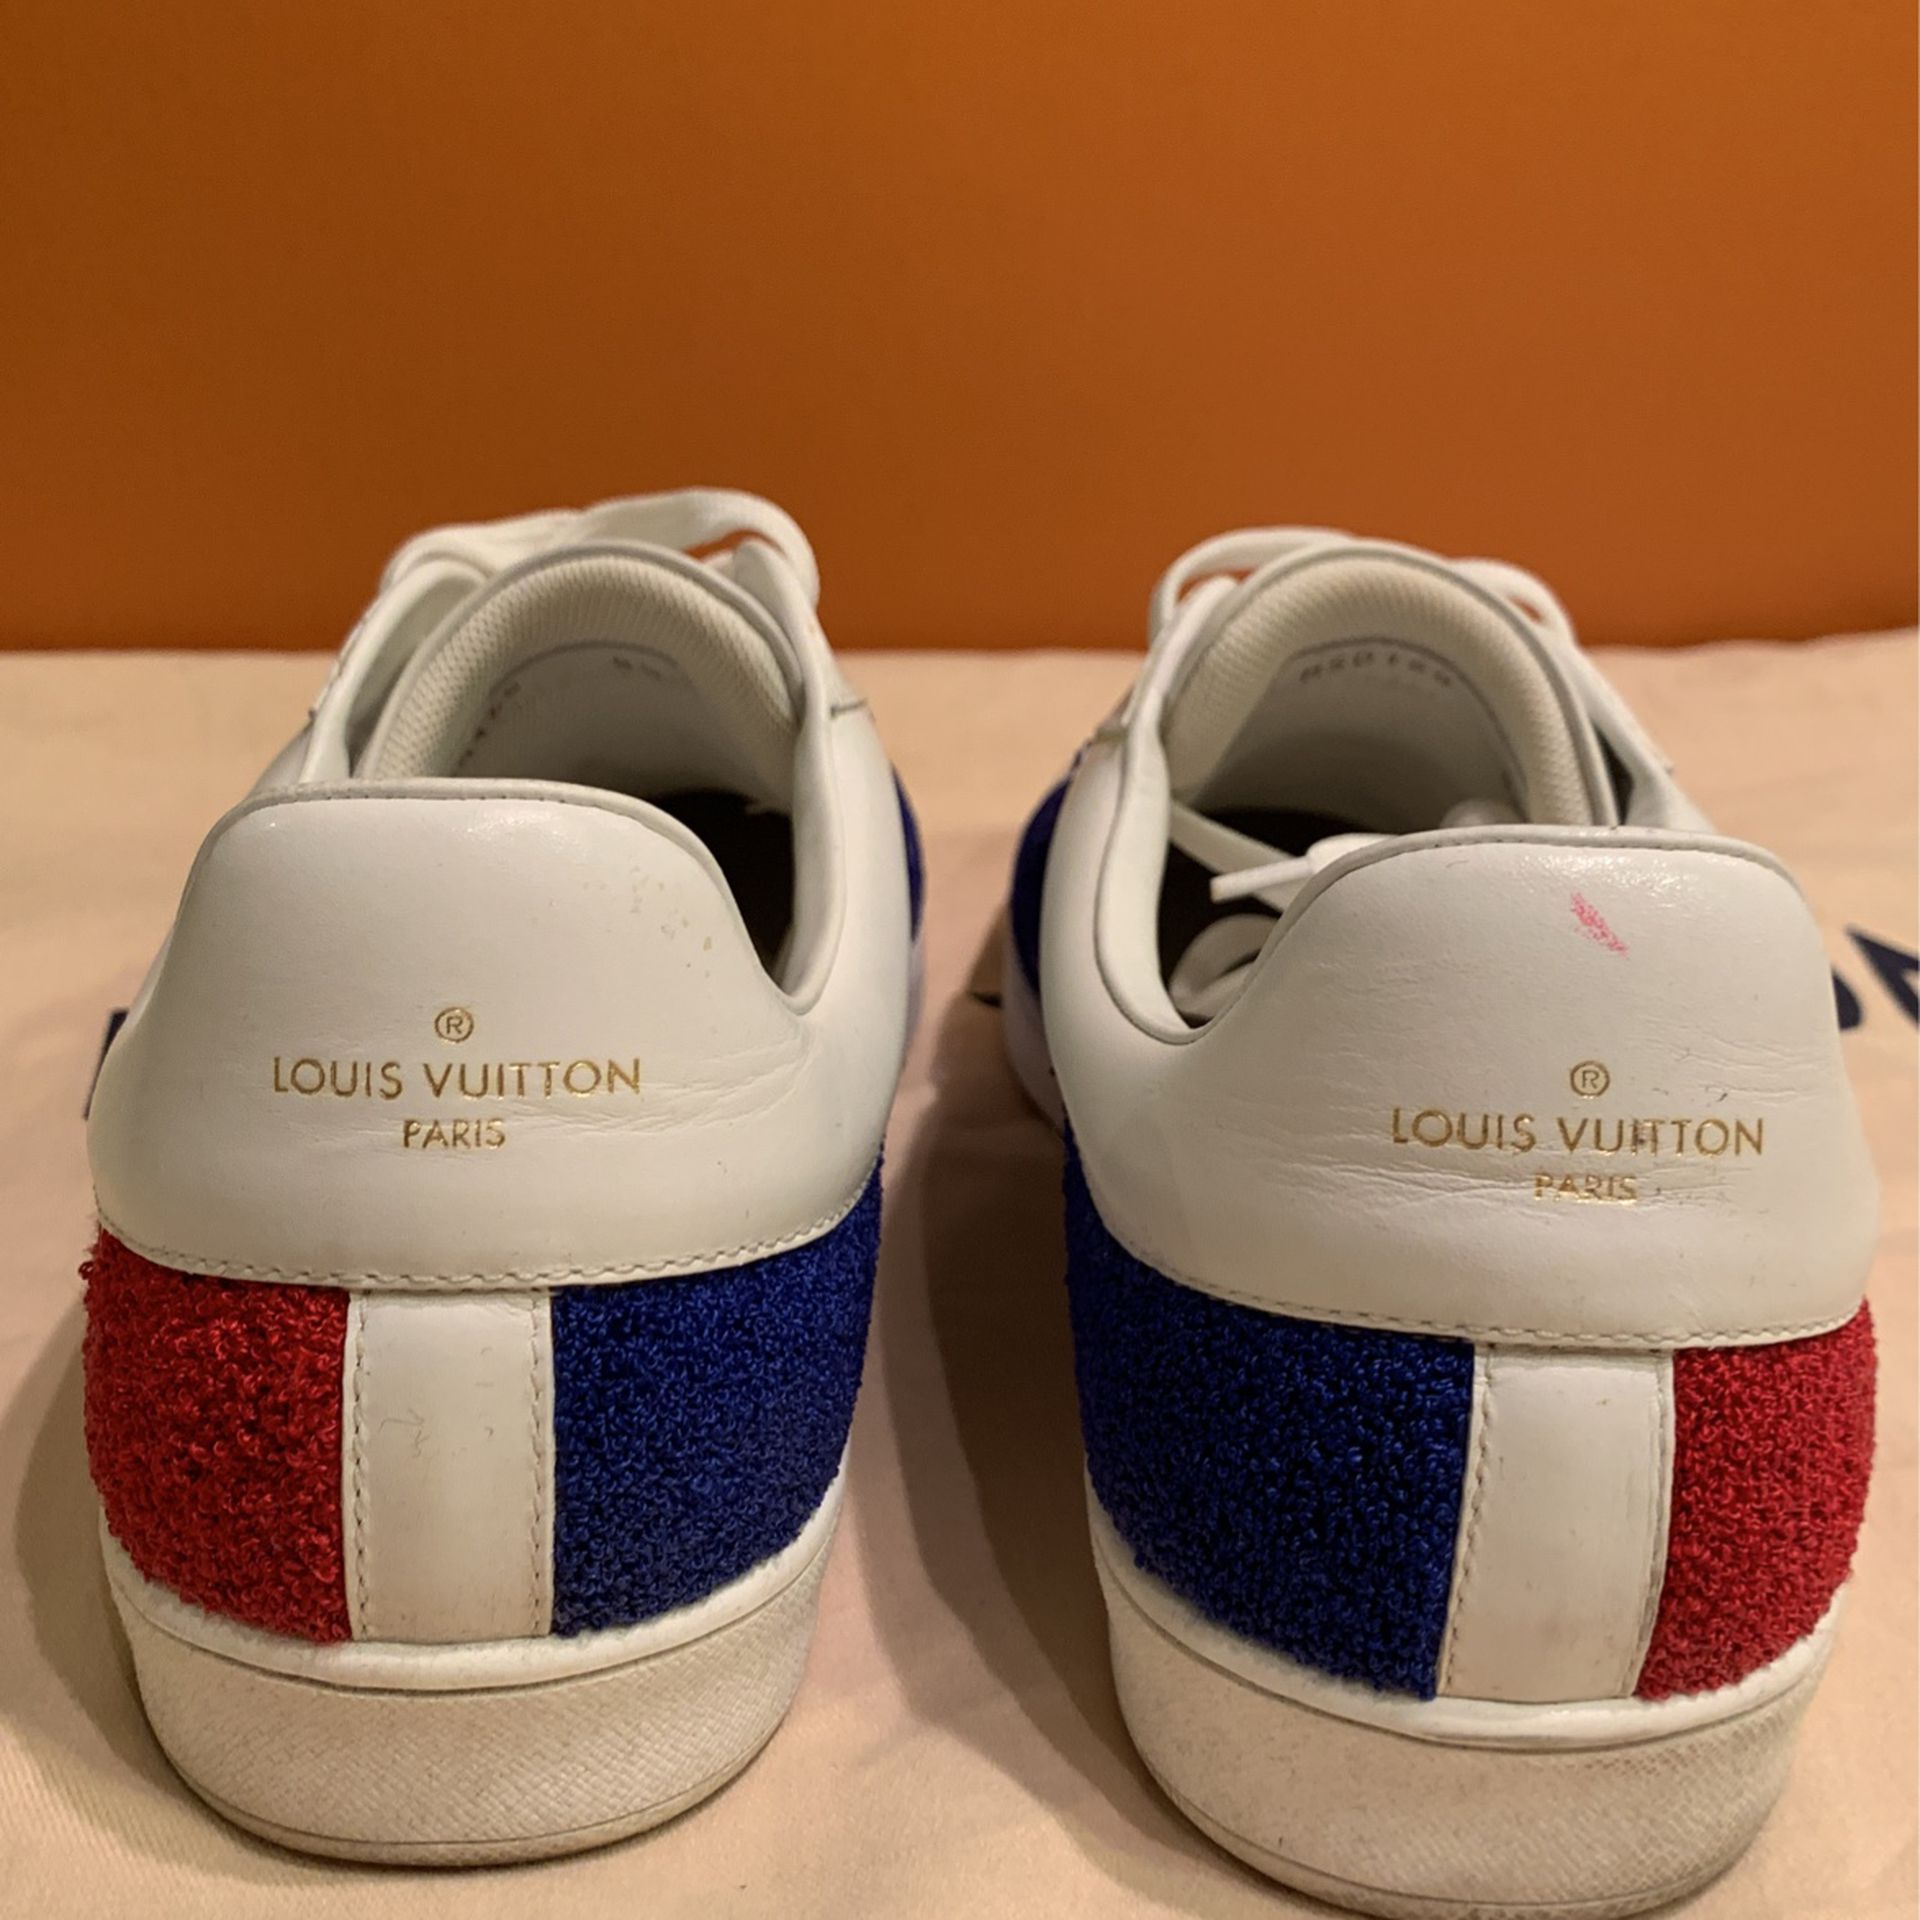 LV Tennis Shoes for Sale in Inglewood, CA - OfferUp